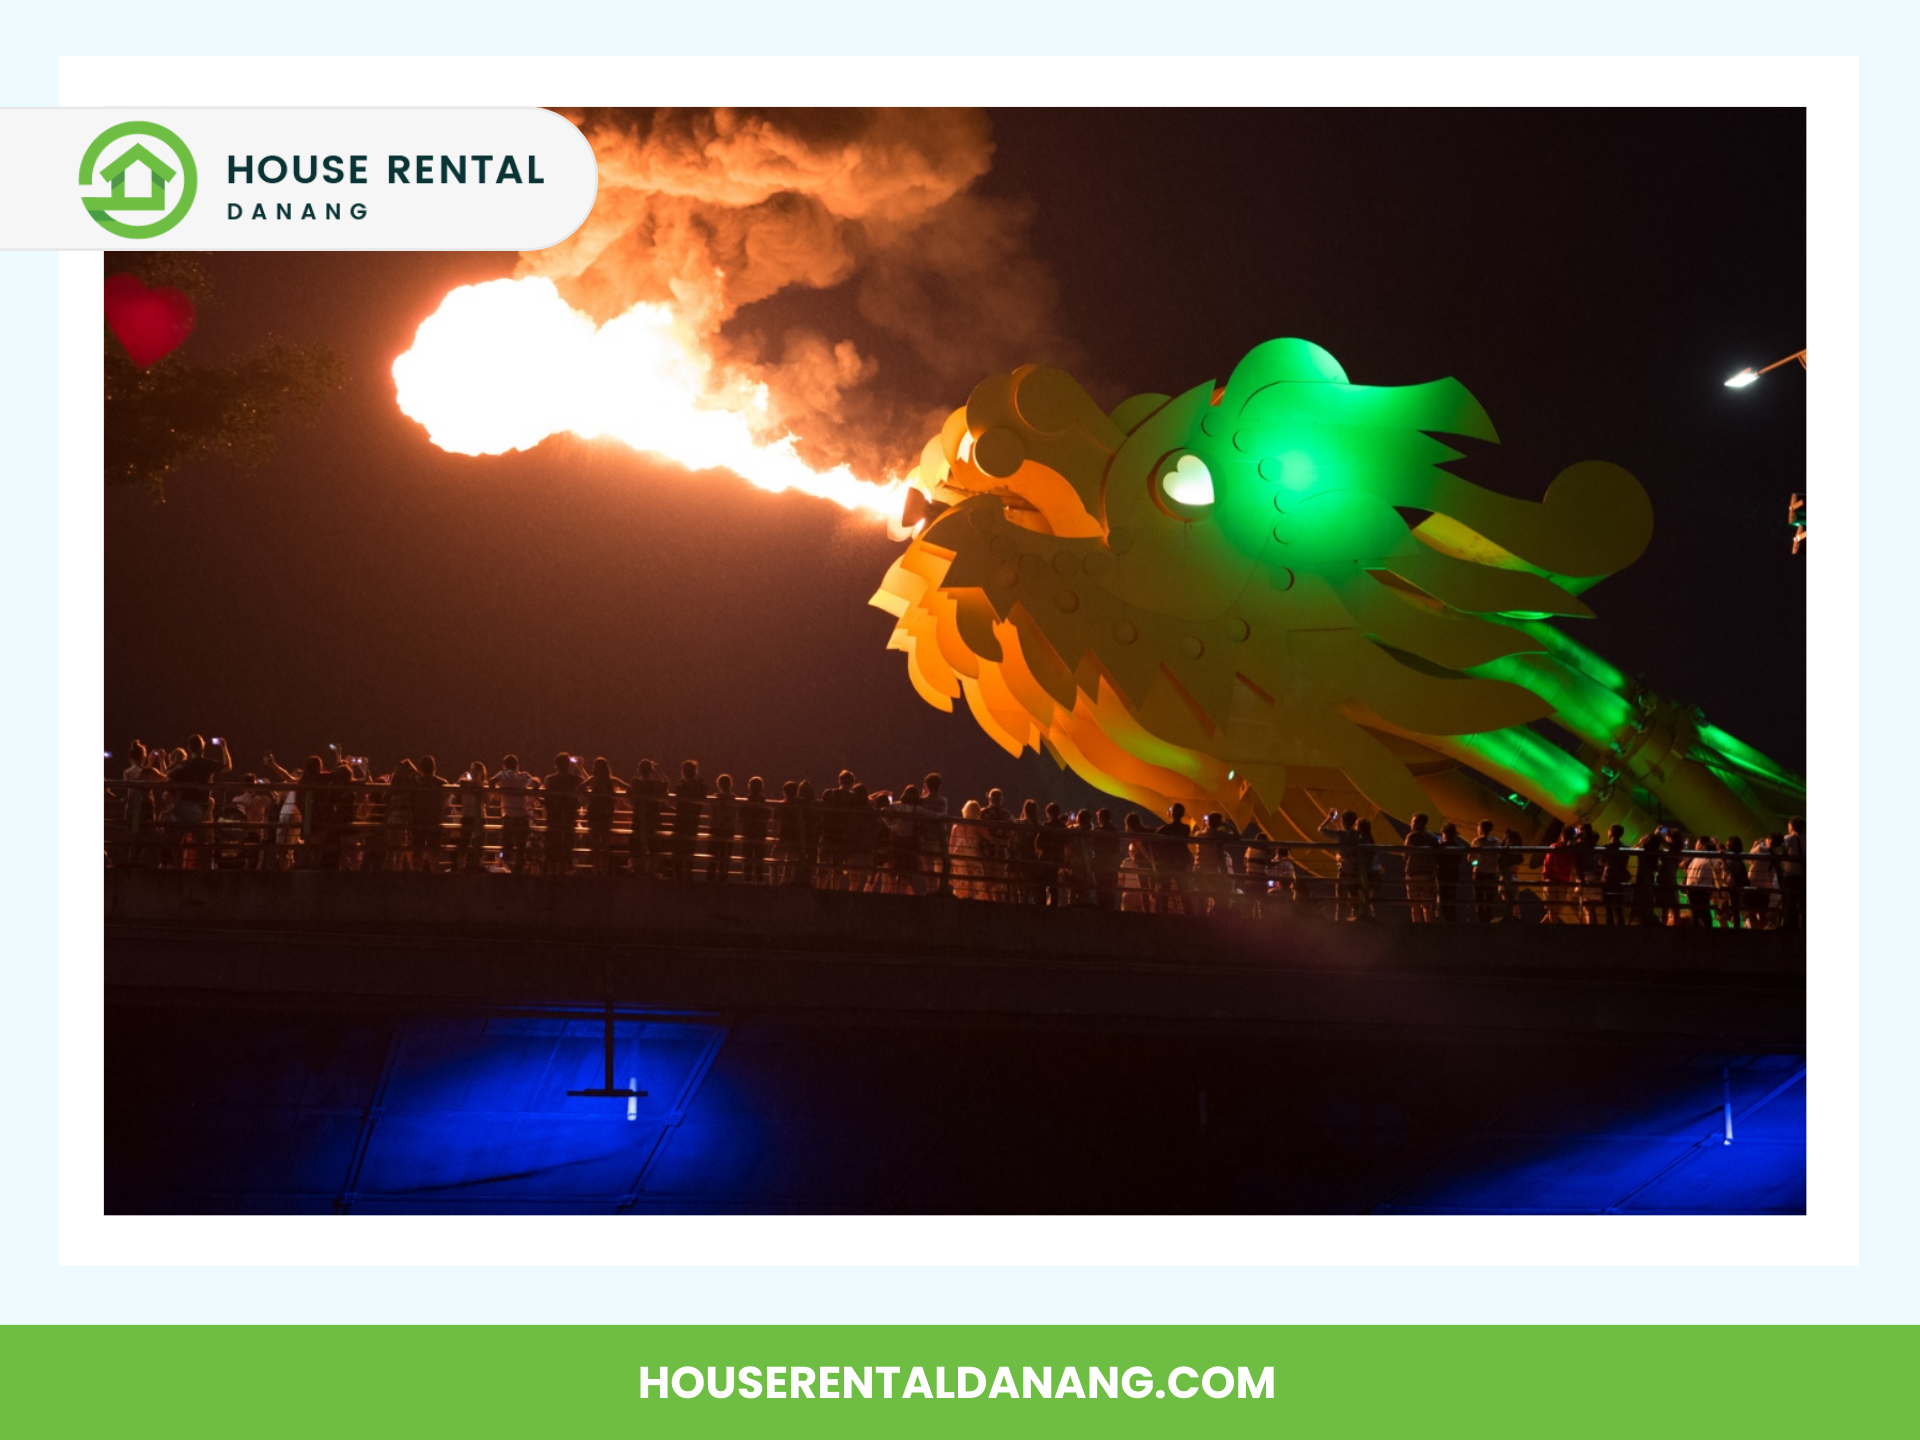 The image shows the Dragon Bridge in Da Nang, featuring a dragon sculpture emitting fire from its mouth at night. A crowd of people is gathered on the bridge, watching the spectacular display. The text reads "House Rental Danang" and a website URL.